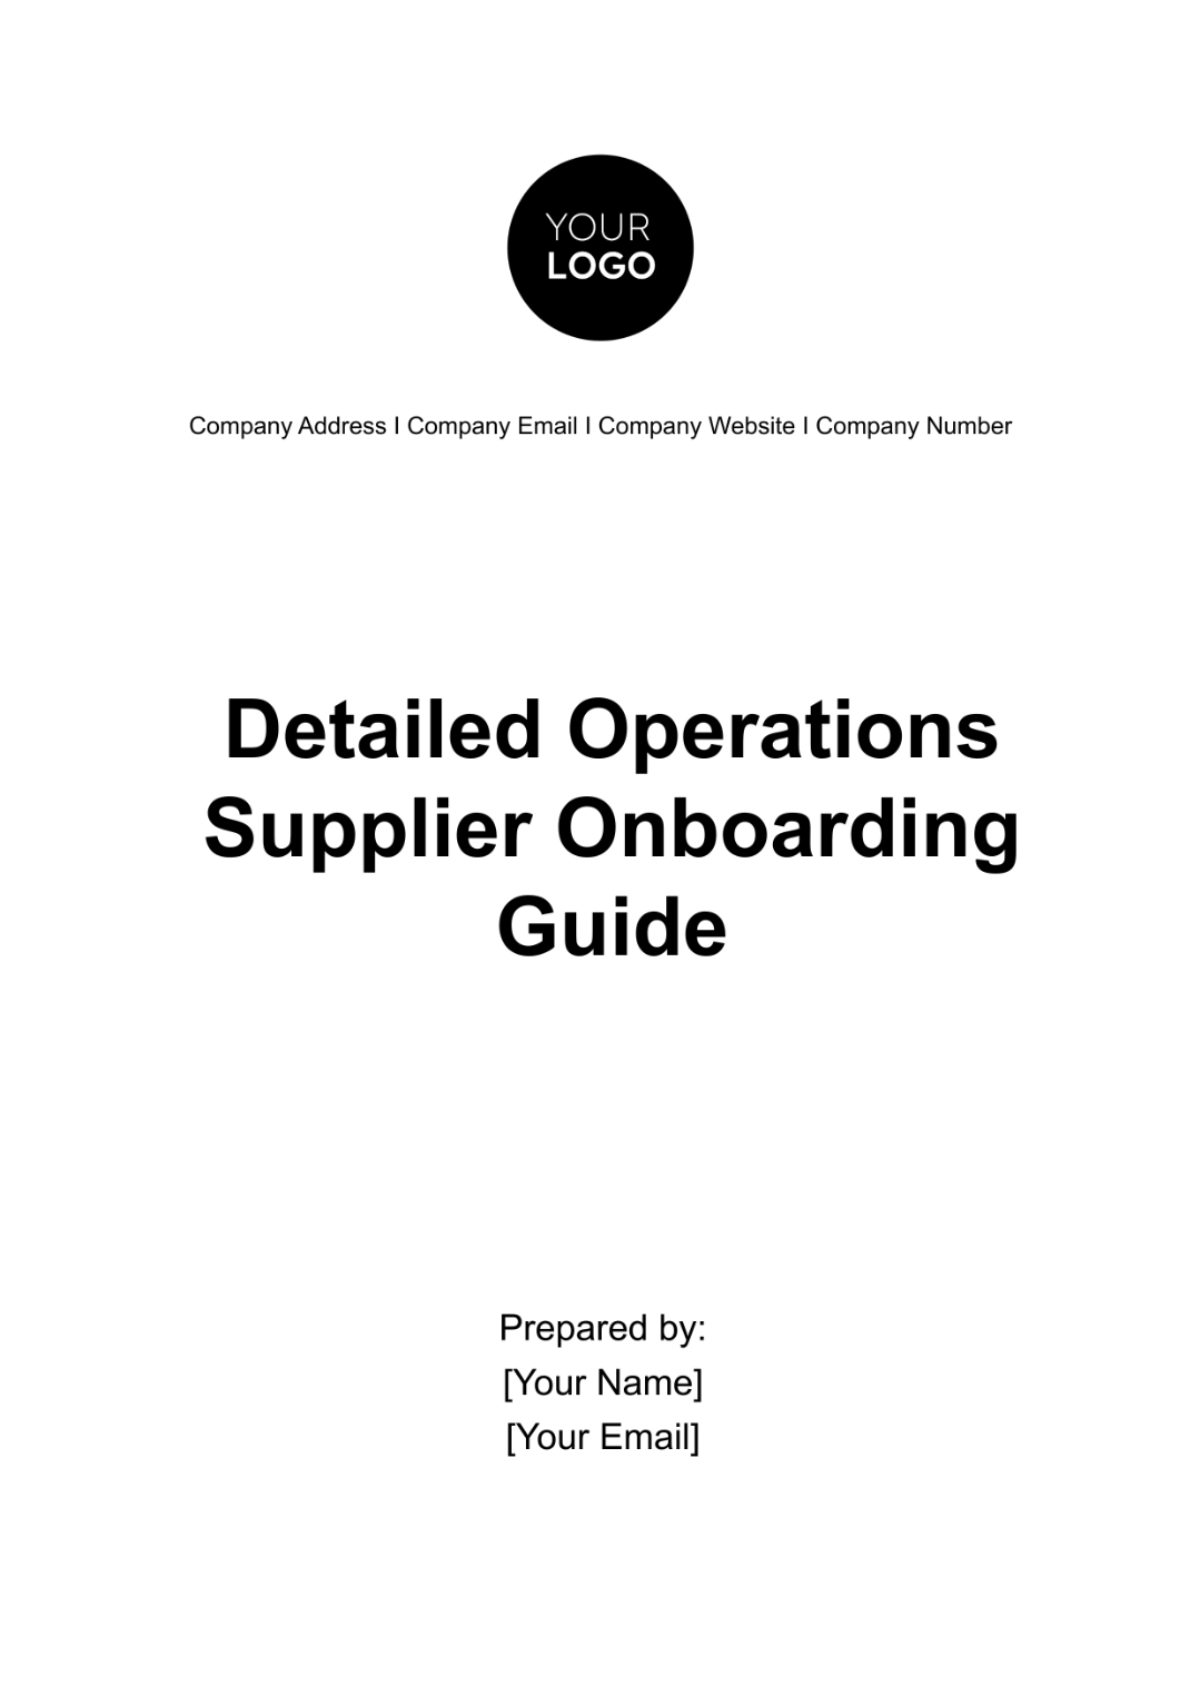 Detailed Operations Supplier Onboarding Guide Template